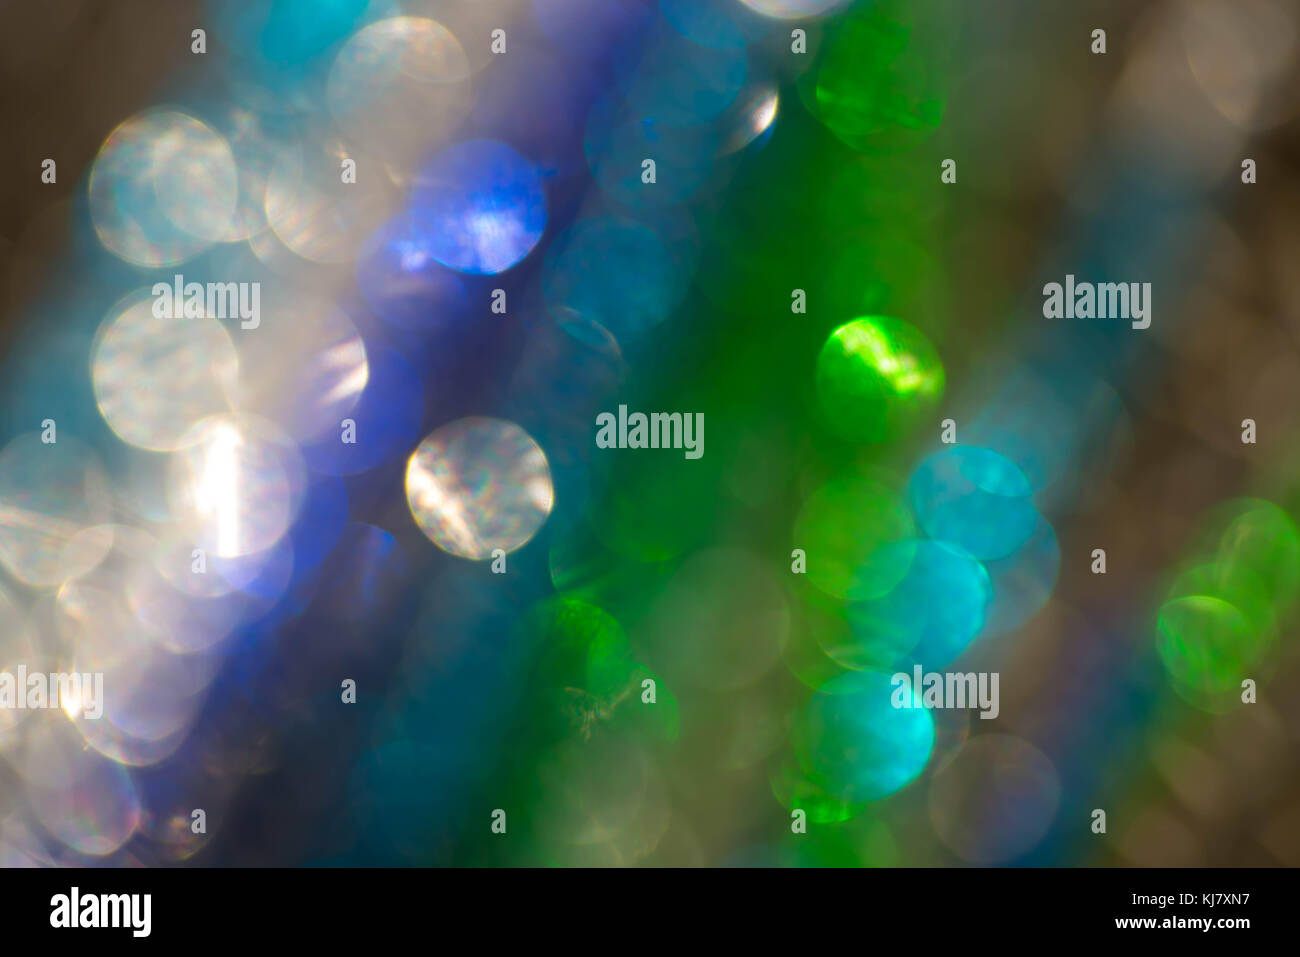 multicolored abstract lights background with bokeh Stock Photo